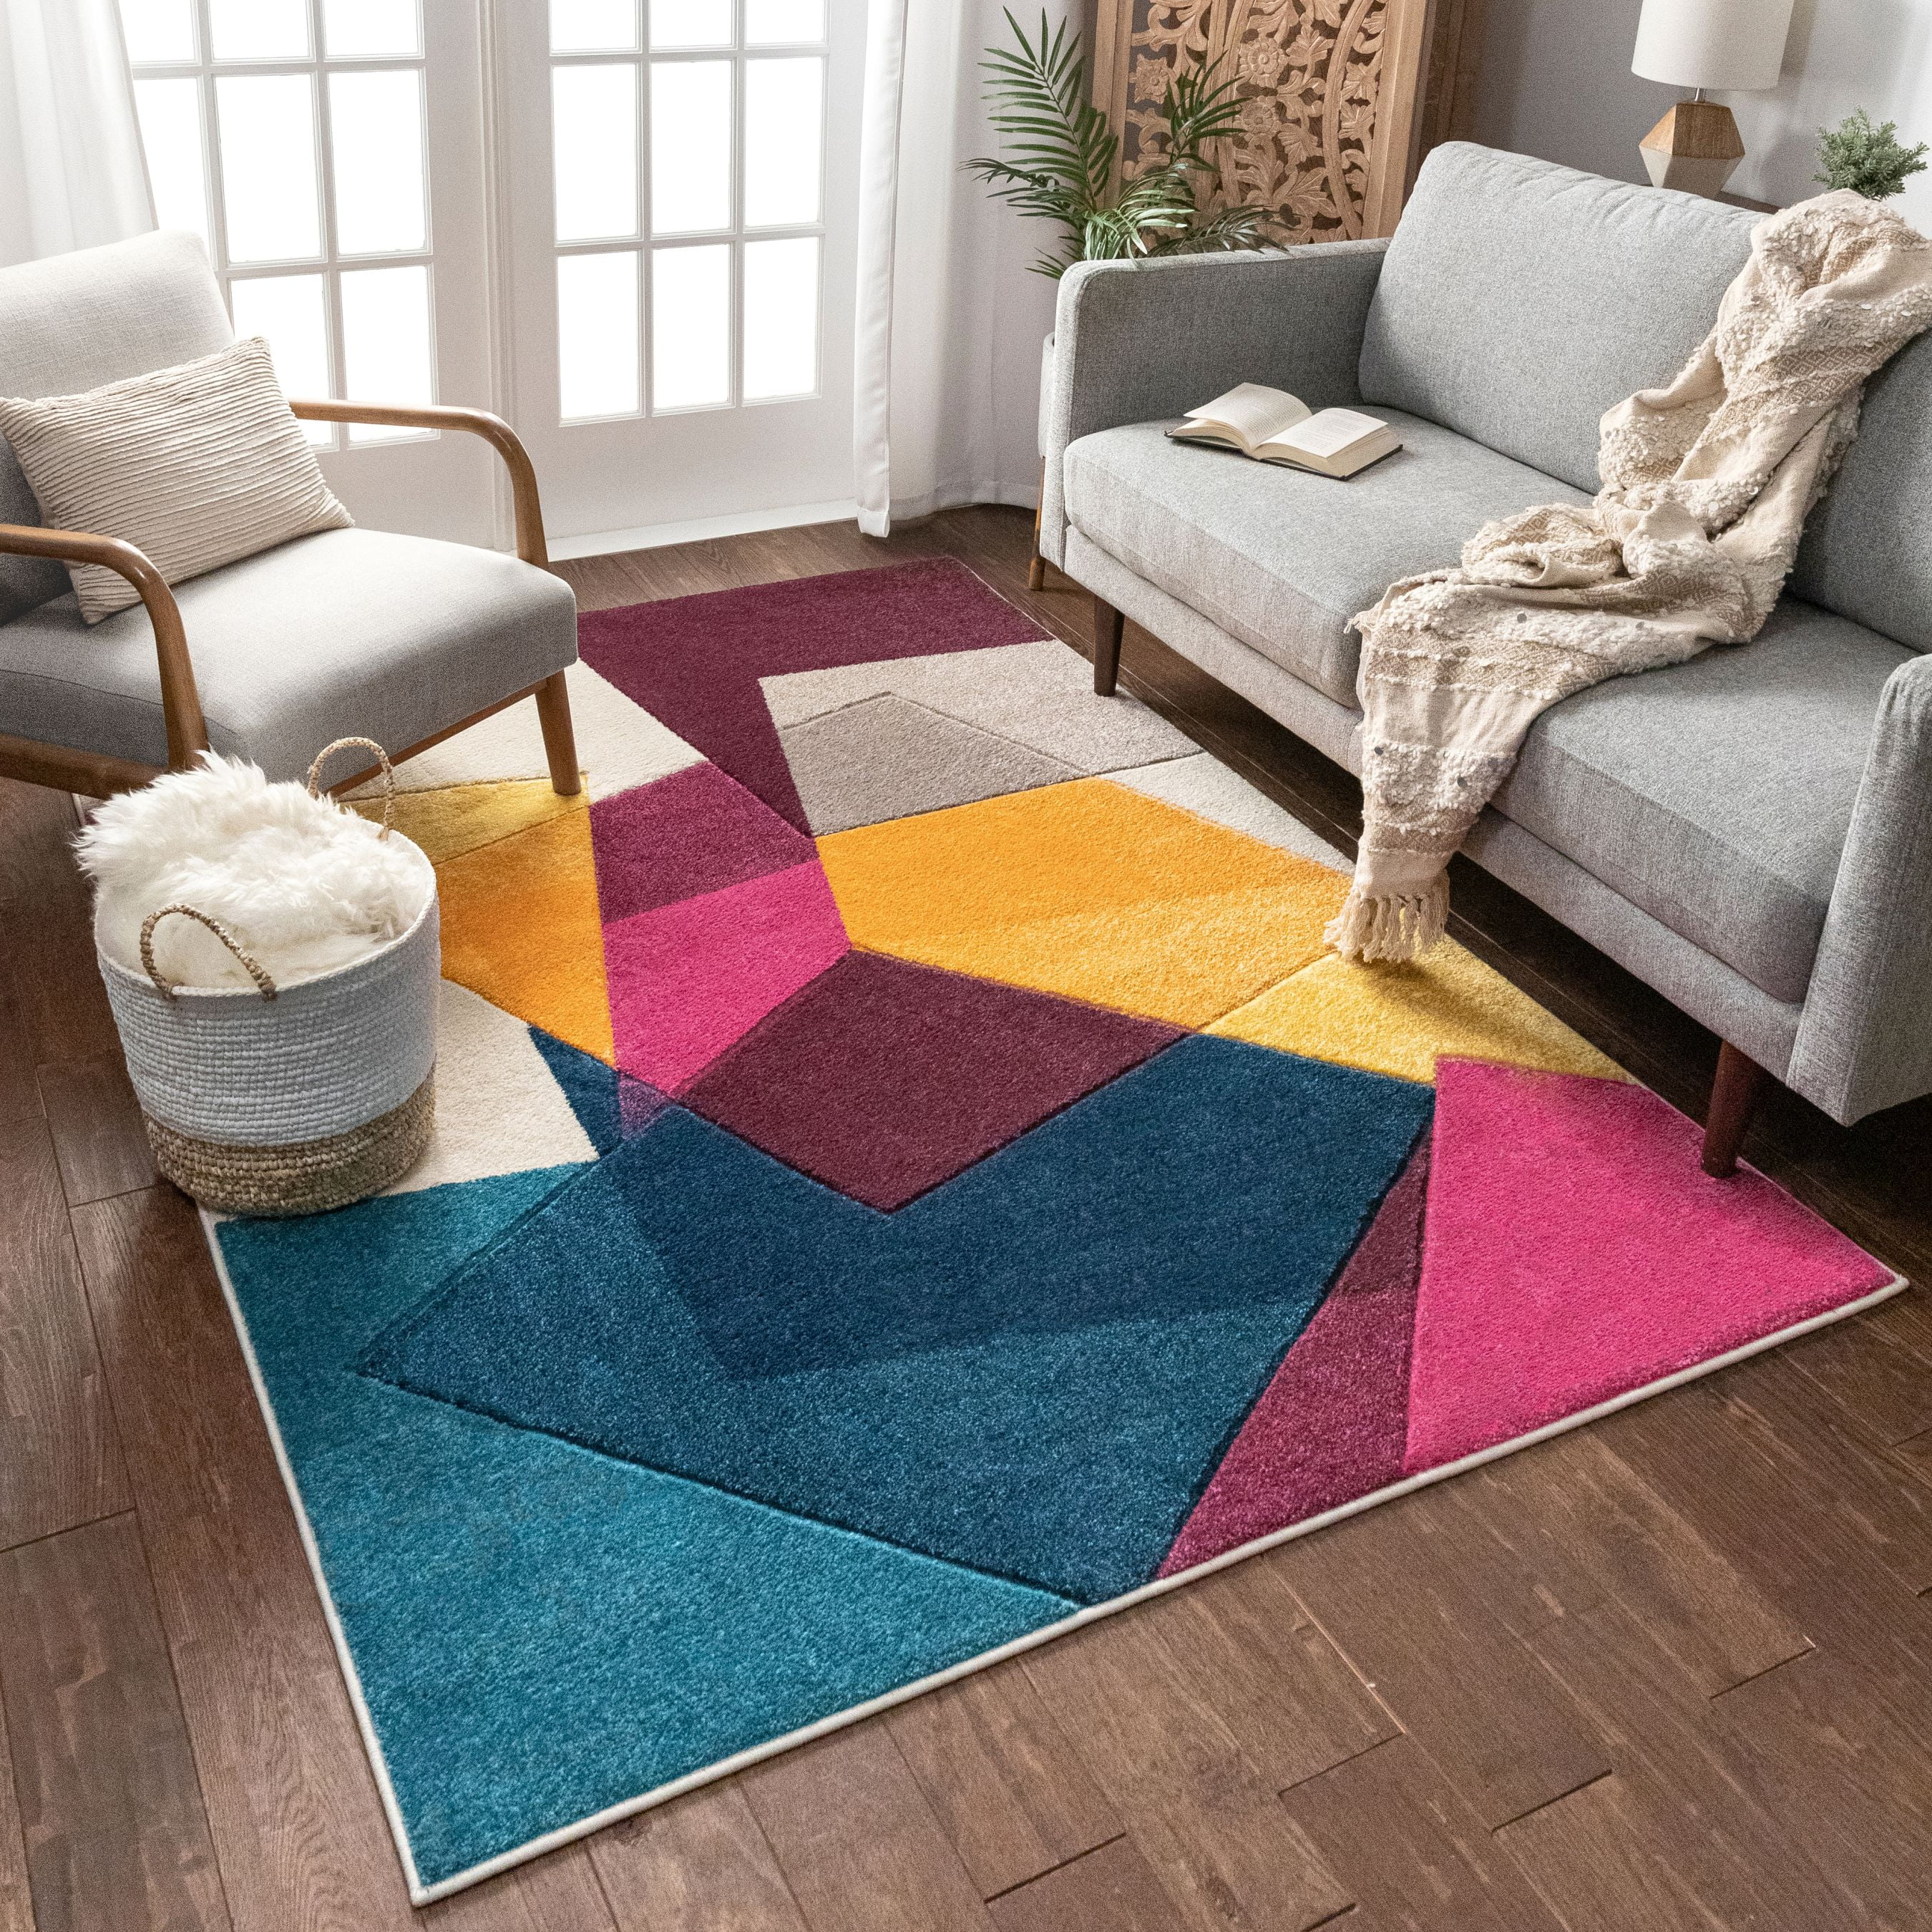 Retro Colorful Abstract Kaleidoscope Pattern 4'8X6'6 Area Rug Dining Room Entryway Foyer Living Room Bedroom Study Children Playroom Crawl Rug on Slip Washable Floor Mats.